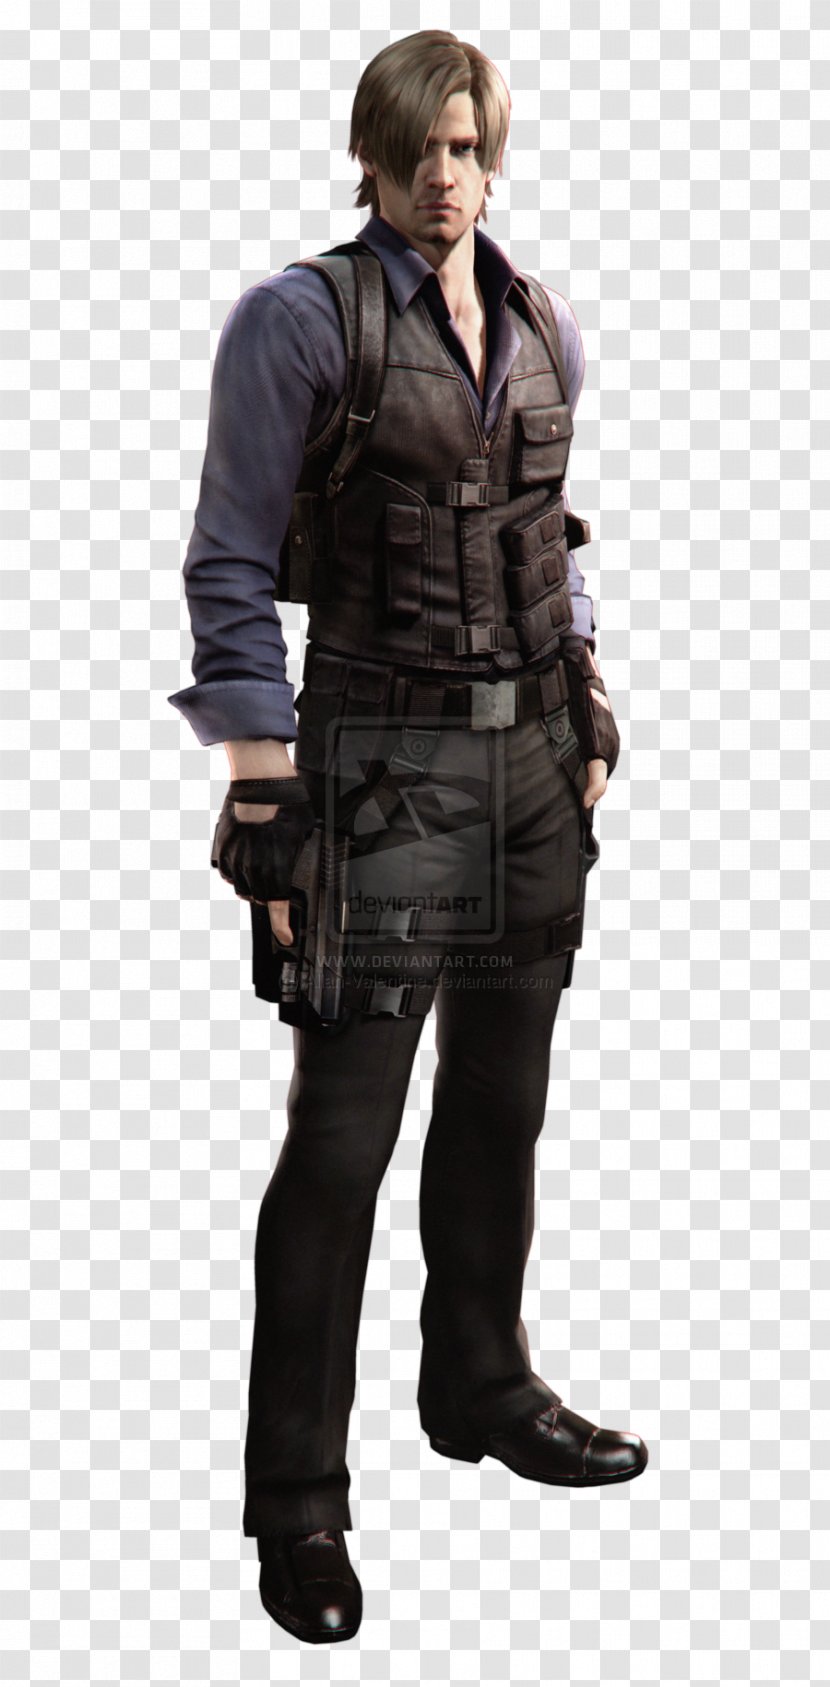 Resident Evil 6 Leon S. Kennedy 4 Ada Wong 2 - Video Game - Chris 5 Transparent PNG